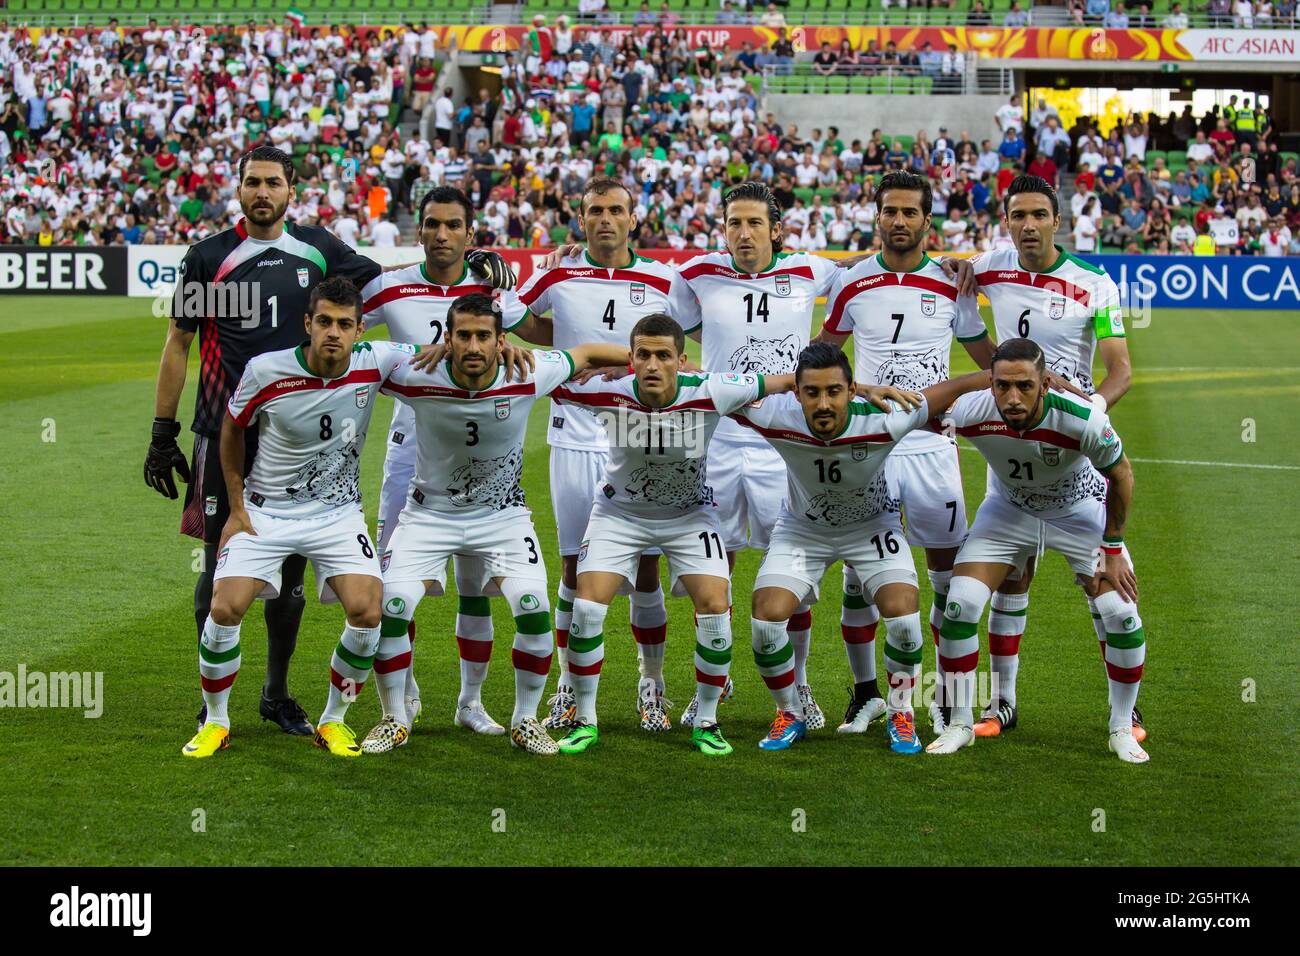 Iran Vs Bahrain in the Asian Cup 2015 Stock Photo - Alamy